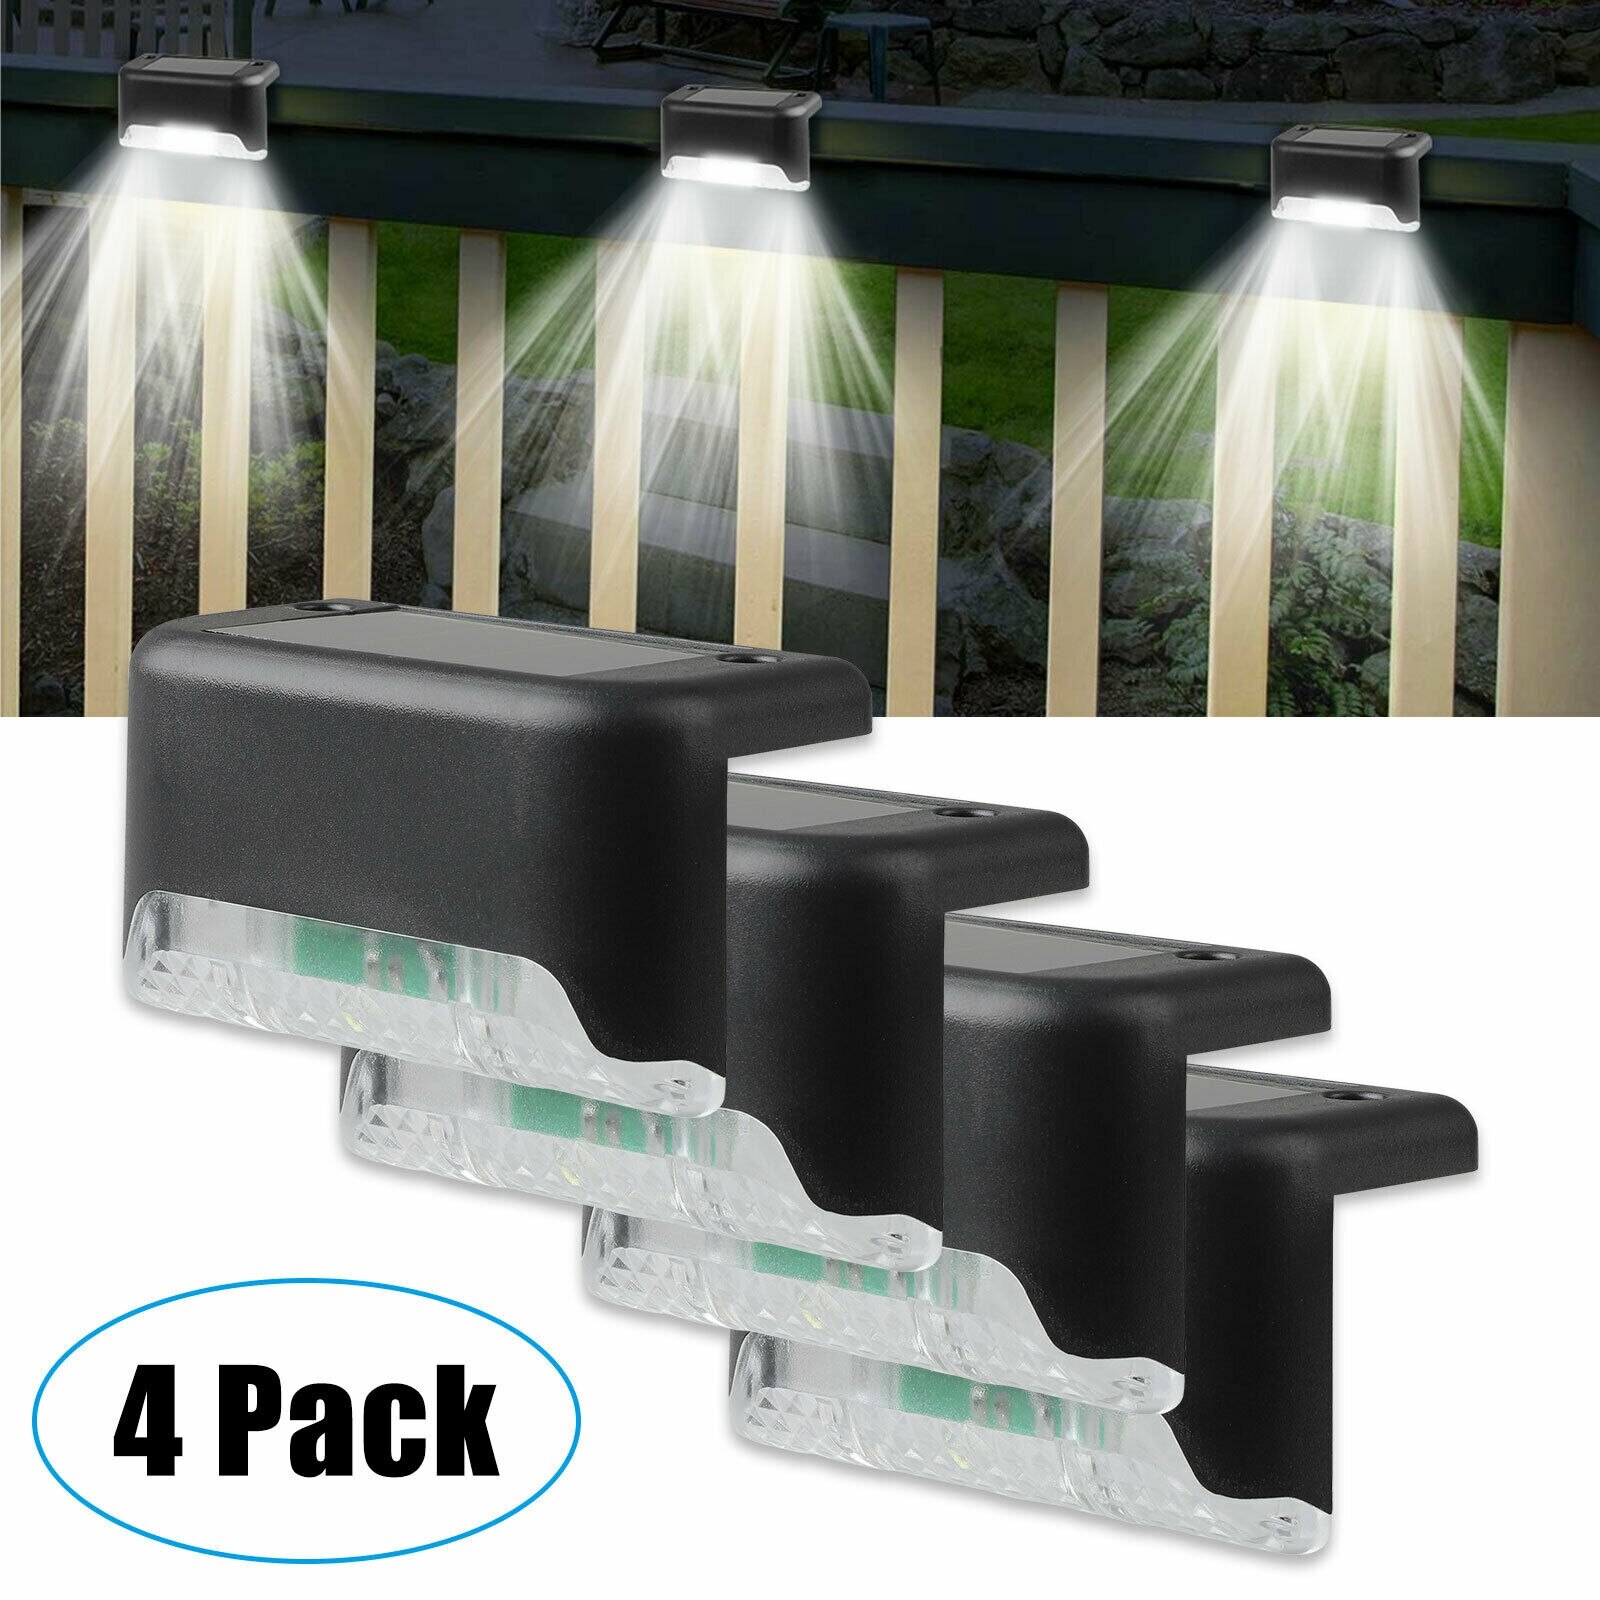 NORDSD Outdoor Lights Fence Traufen Patio Path Patio 4 Pack 4 LED Solar Powered Lights Garden Wall Light for Garden Gutter